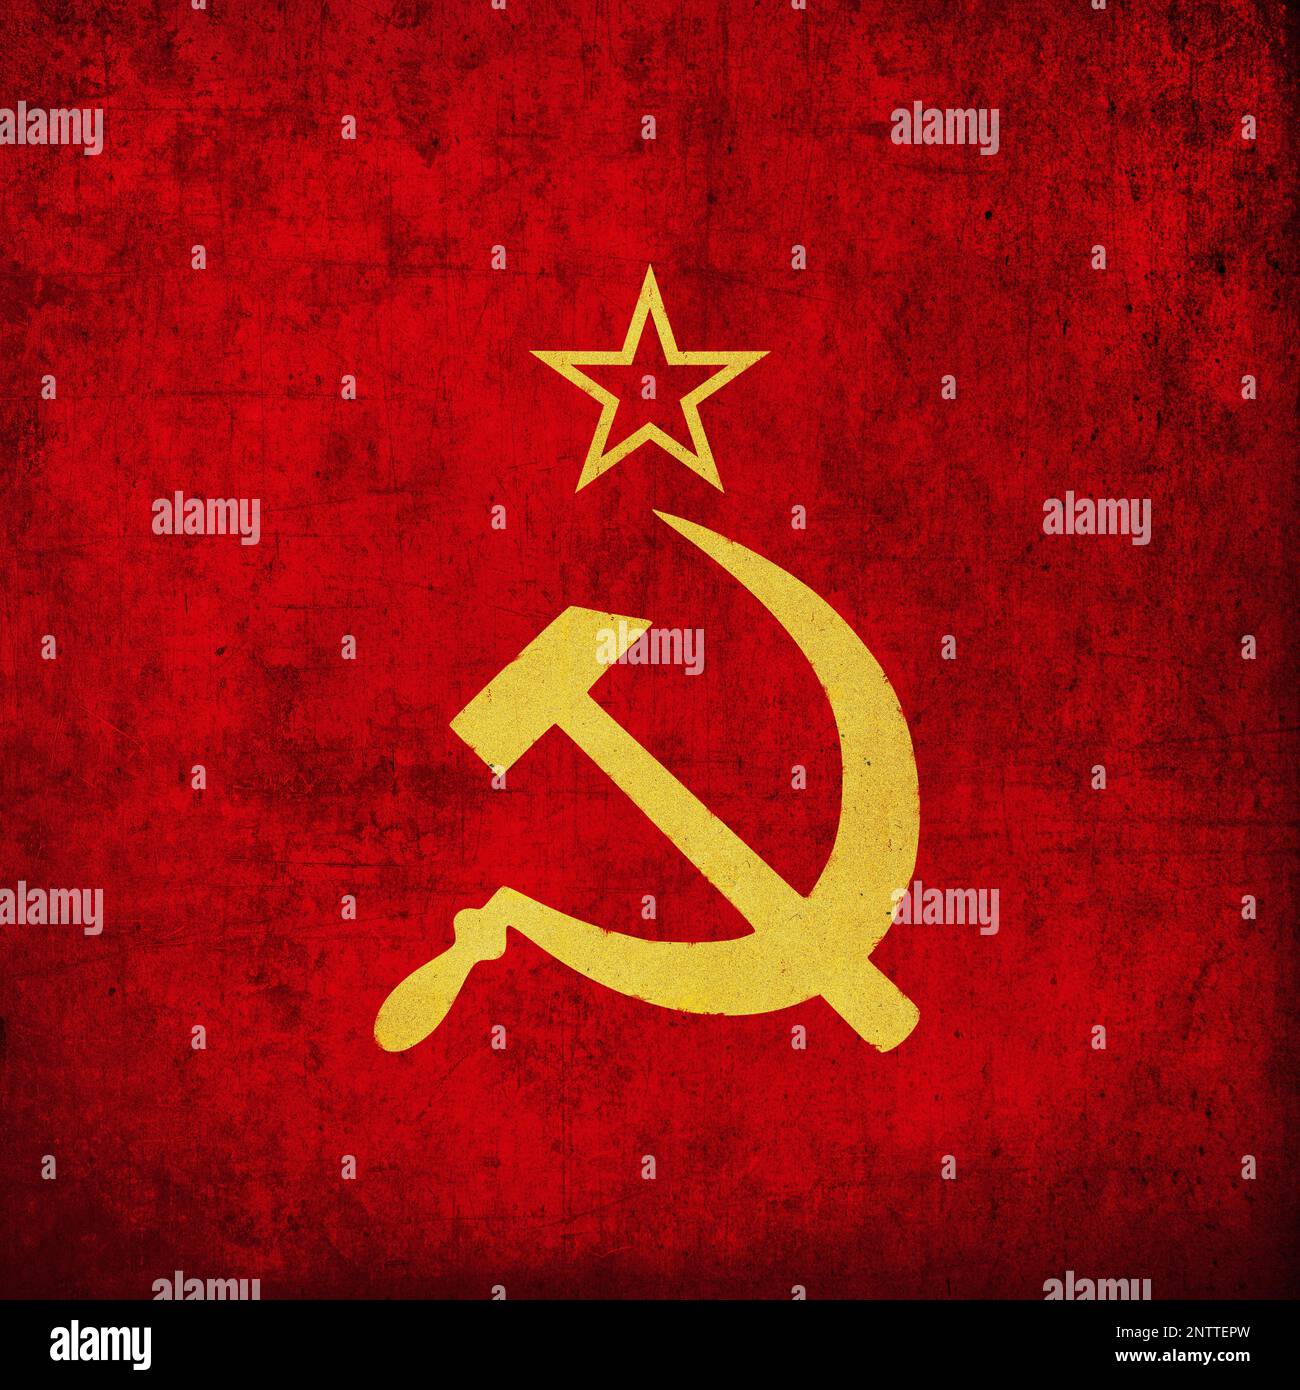 Soviet Union flag fragment: star, hammer and sickle on red background. USSR banner, grunge textured Stock Photo